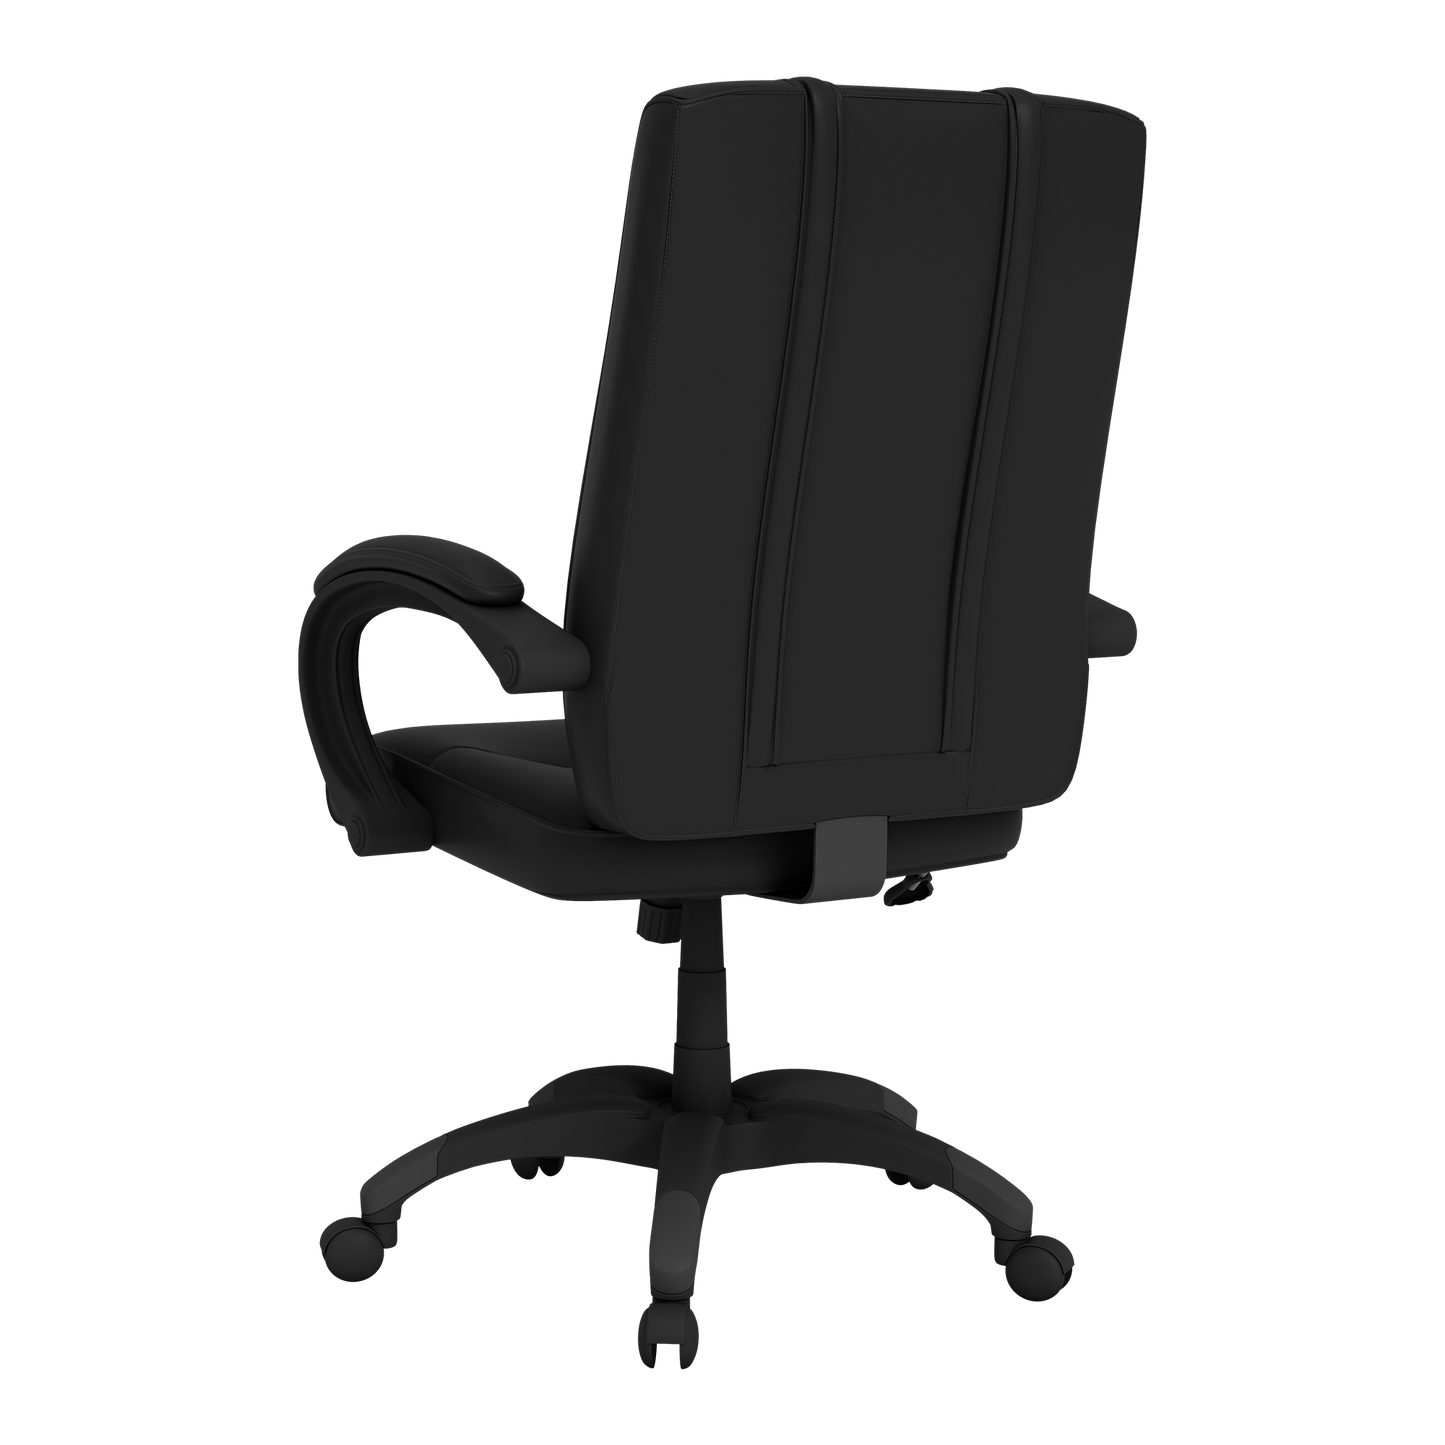 Office Chair 1000 with Boston College Eagles Logo